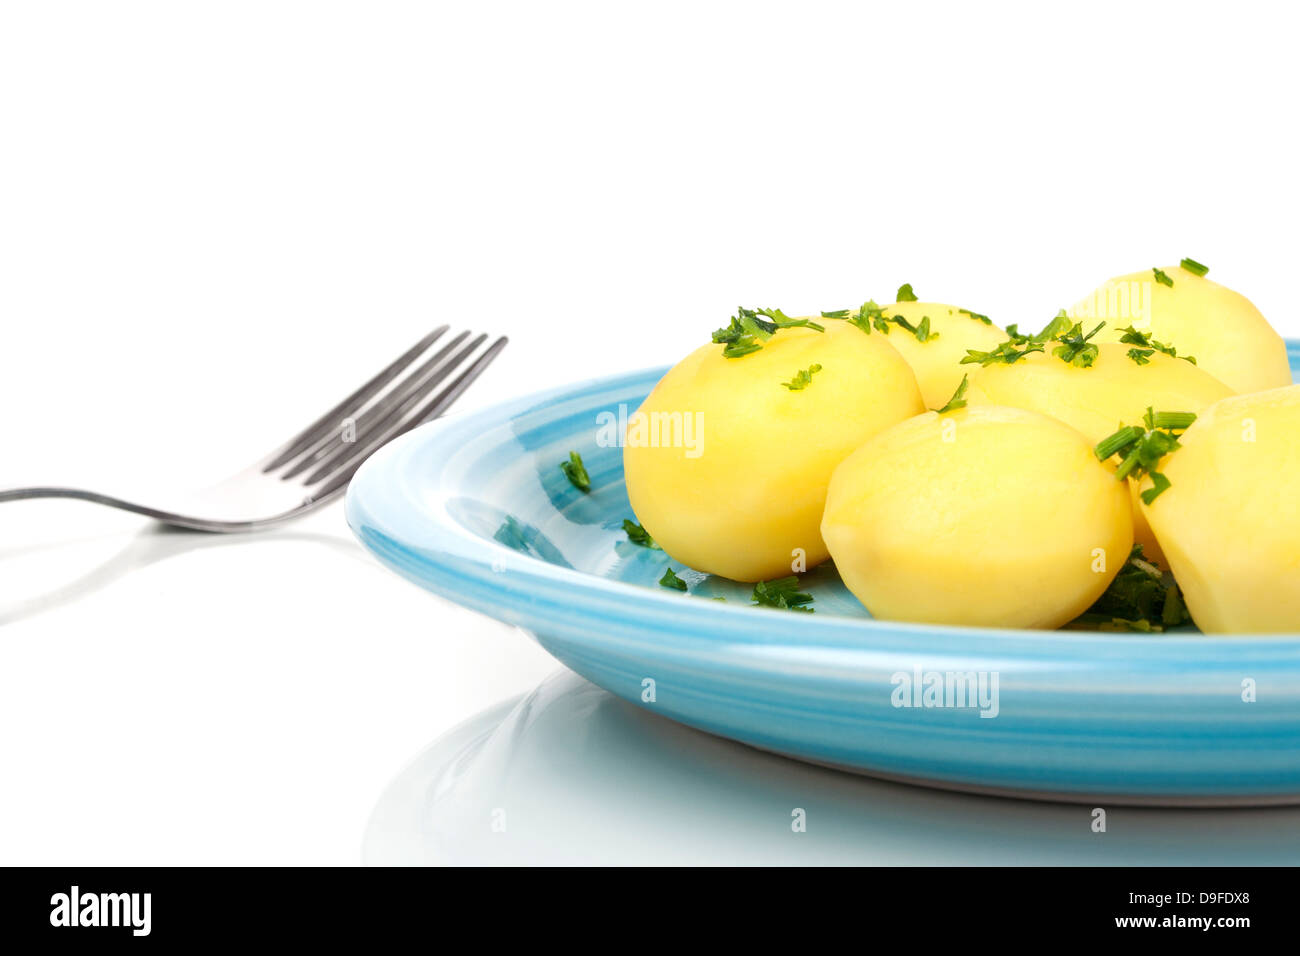 Plate with boiled potatoes and parsley Plate with boiled potatoes and parsley Stock Photo